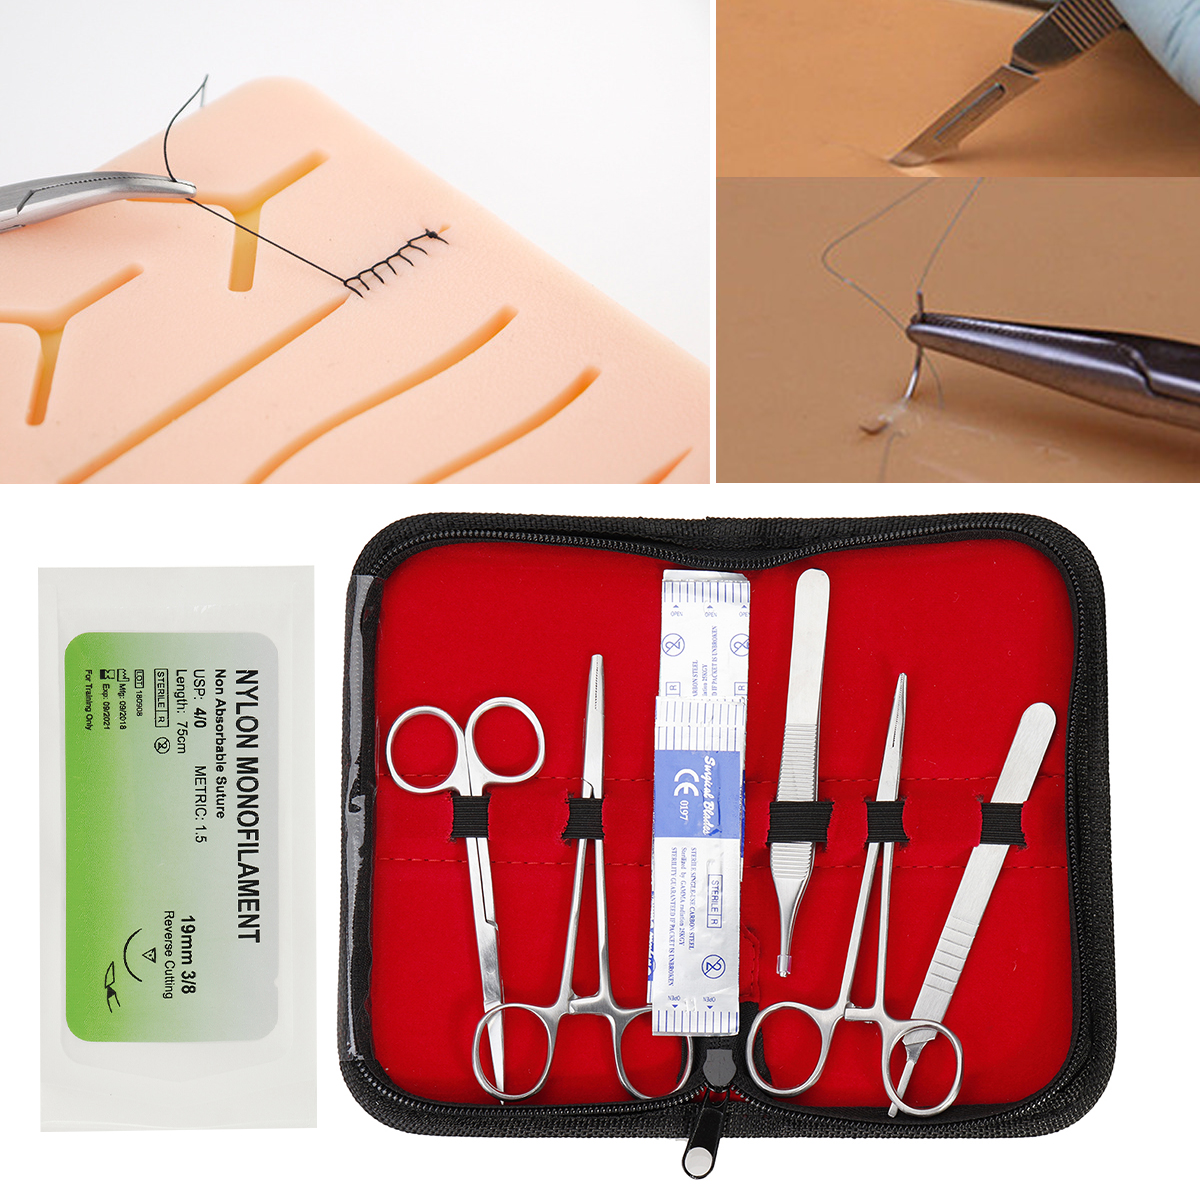 25 In 1 Medical Skin Suture Surgical Training Kit Silicone Pad Needle Scissors 11